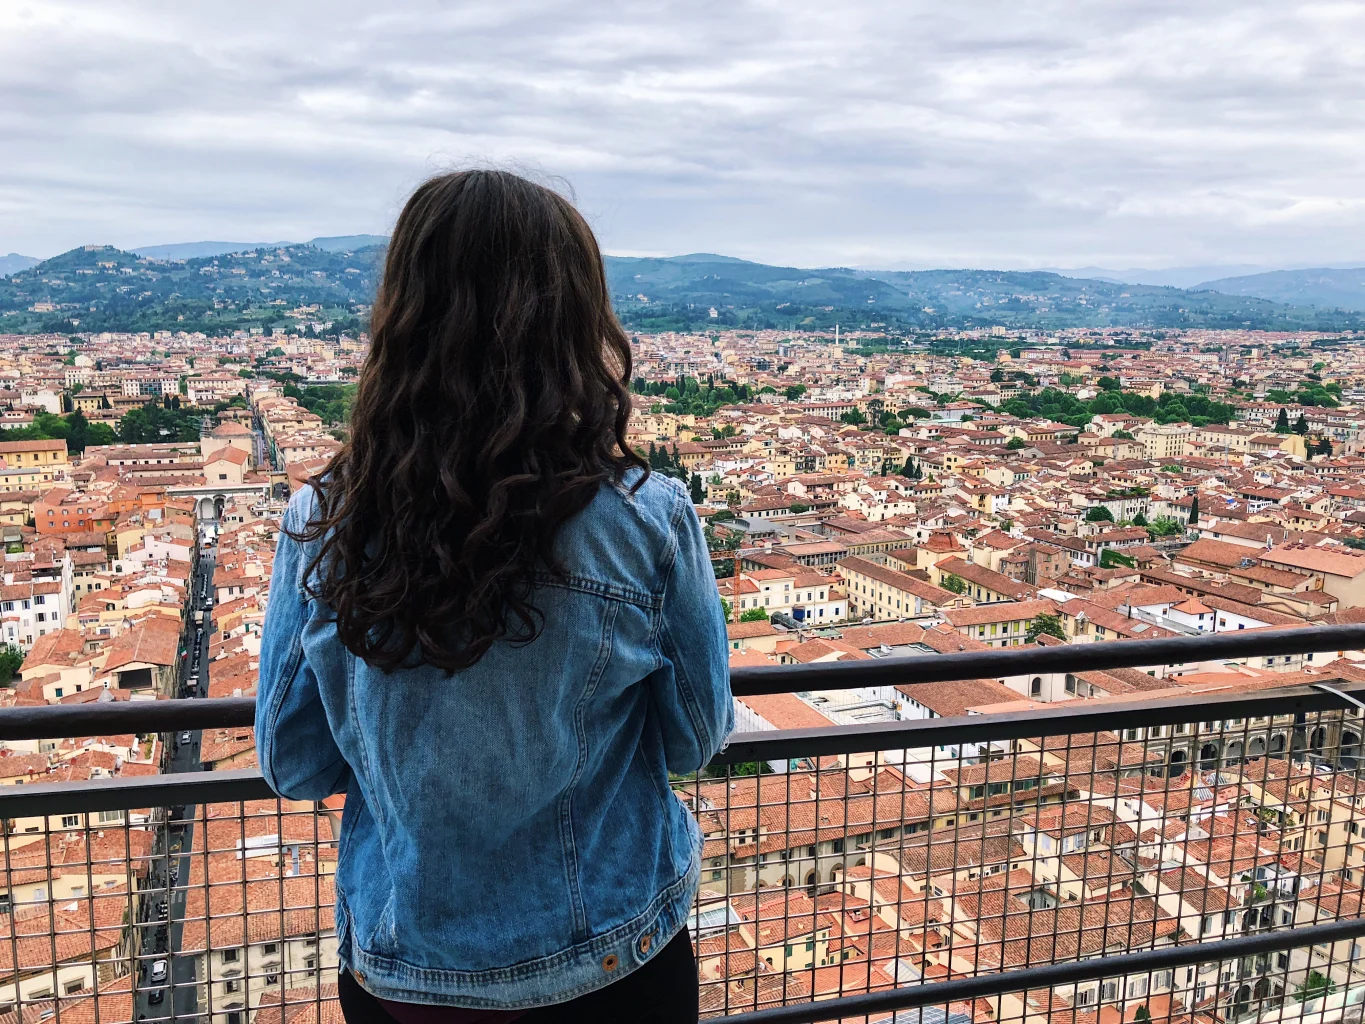 A student overlooking a view of Florence, Italy.